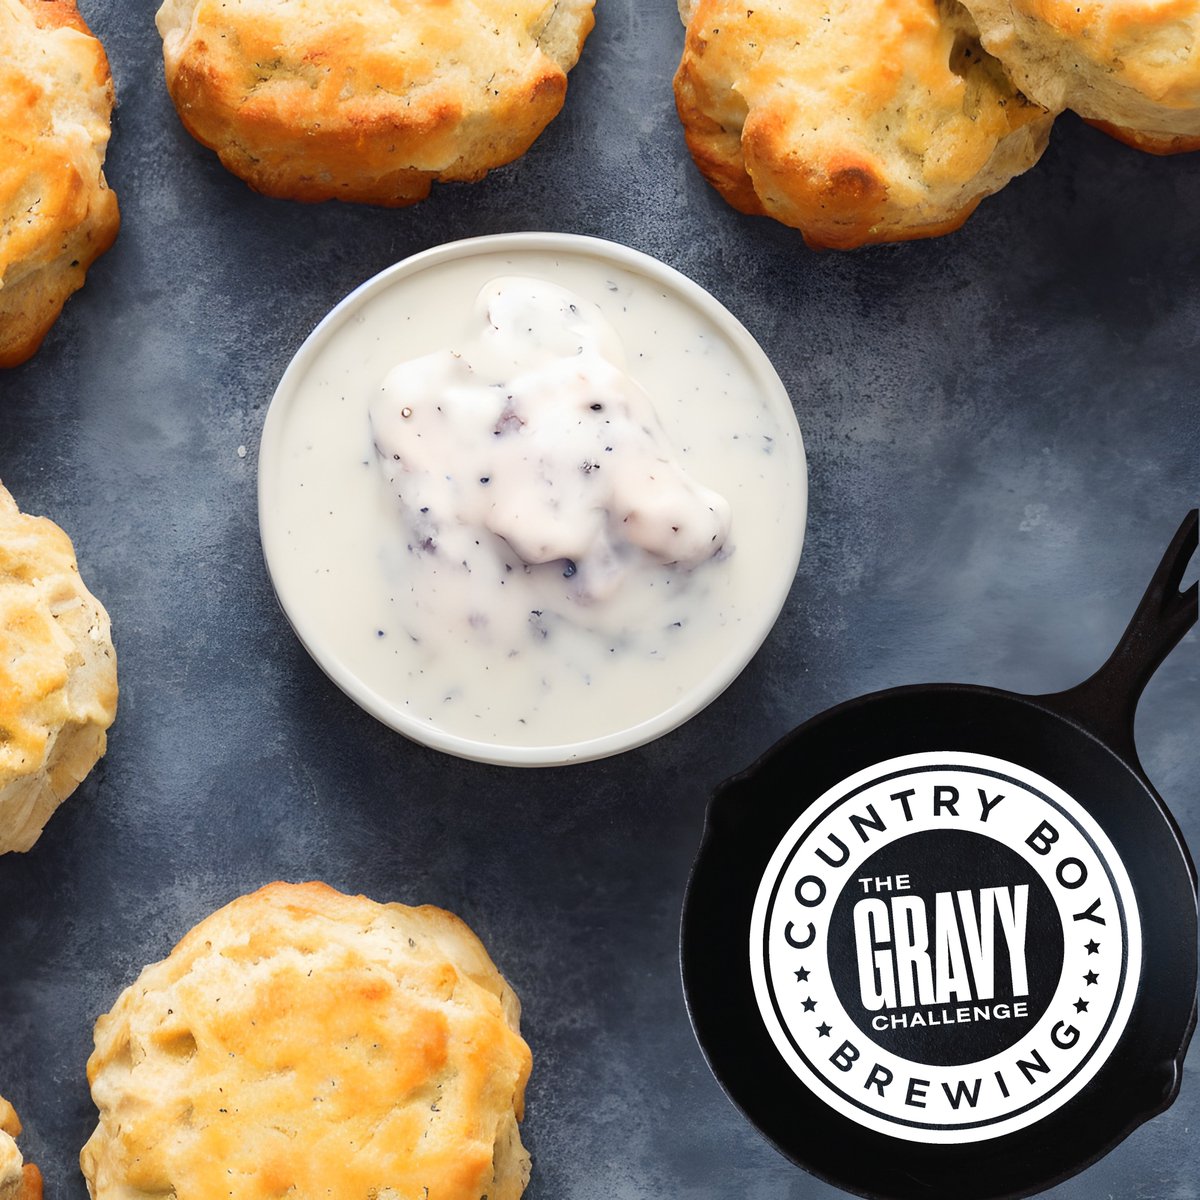 Do you make the best biscuits and gravy around? Bring your recipe to the Country Boy Gravy Challenge! Sign up at the link below, and enter your gravy for a chance to win a $500 cash prize! eventbrite.com/e/country-boy-…